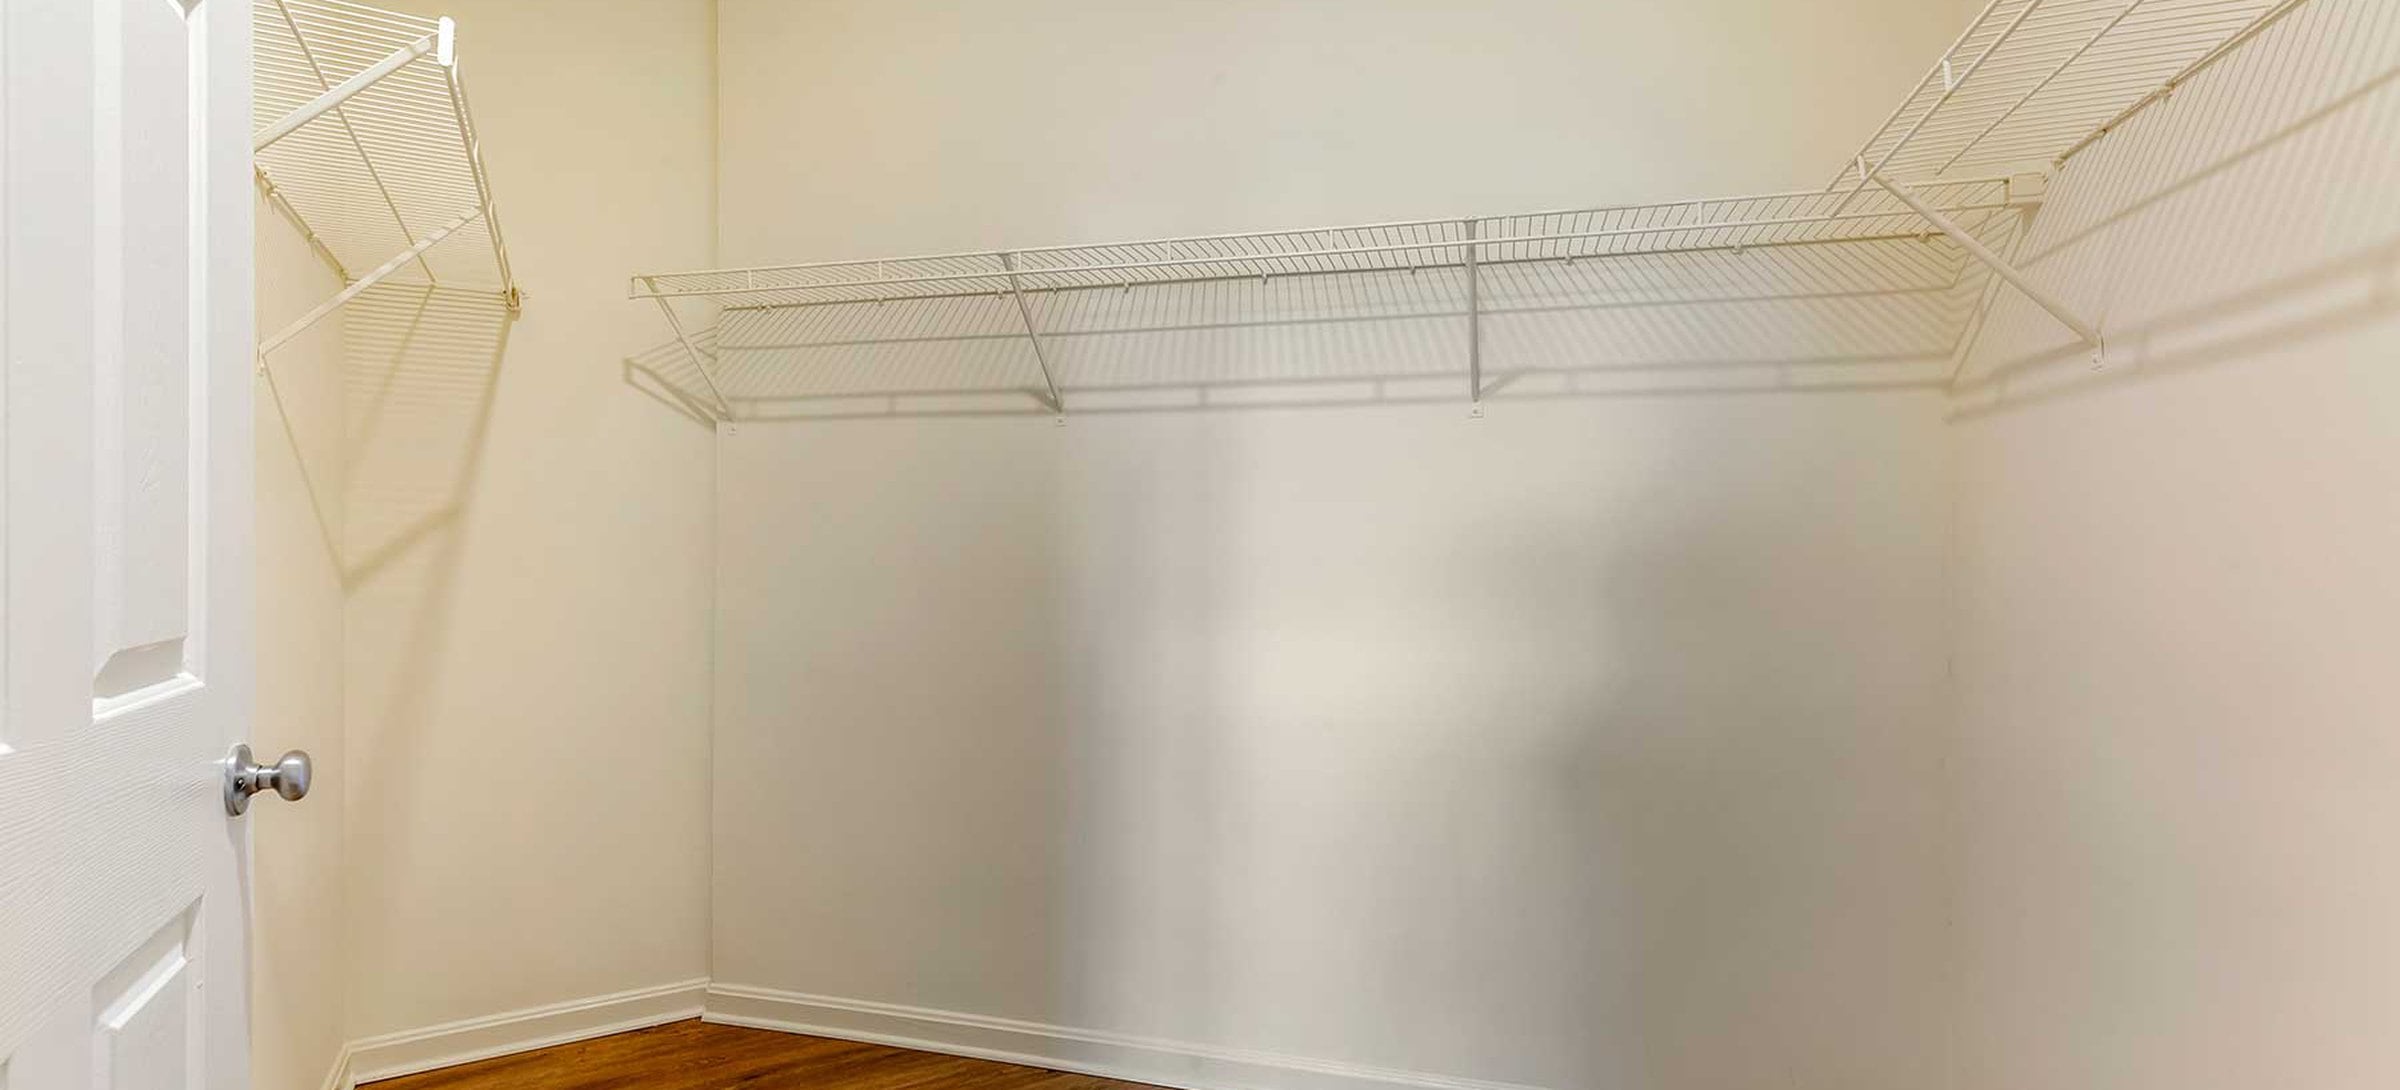 Walk-in closet with linen racks and storage space